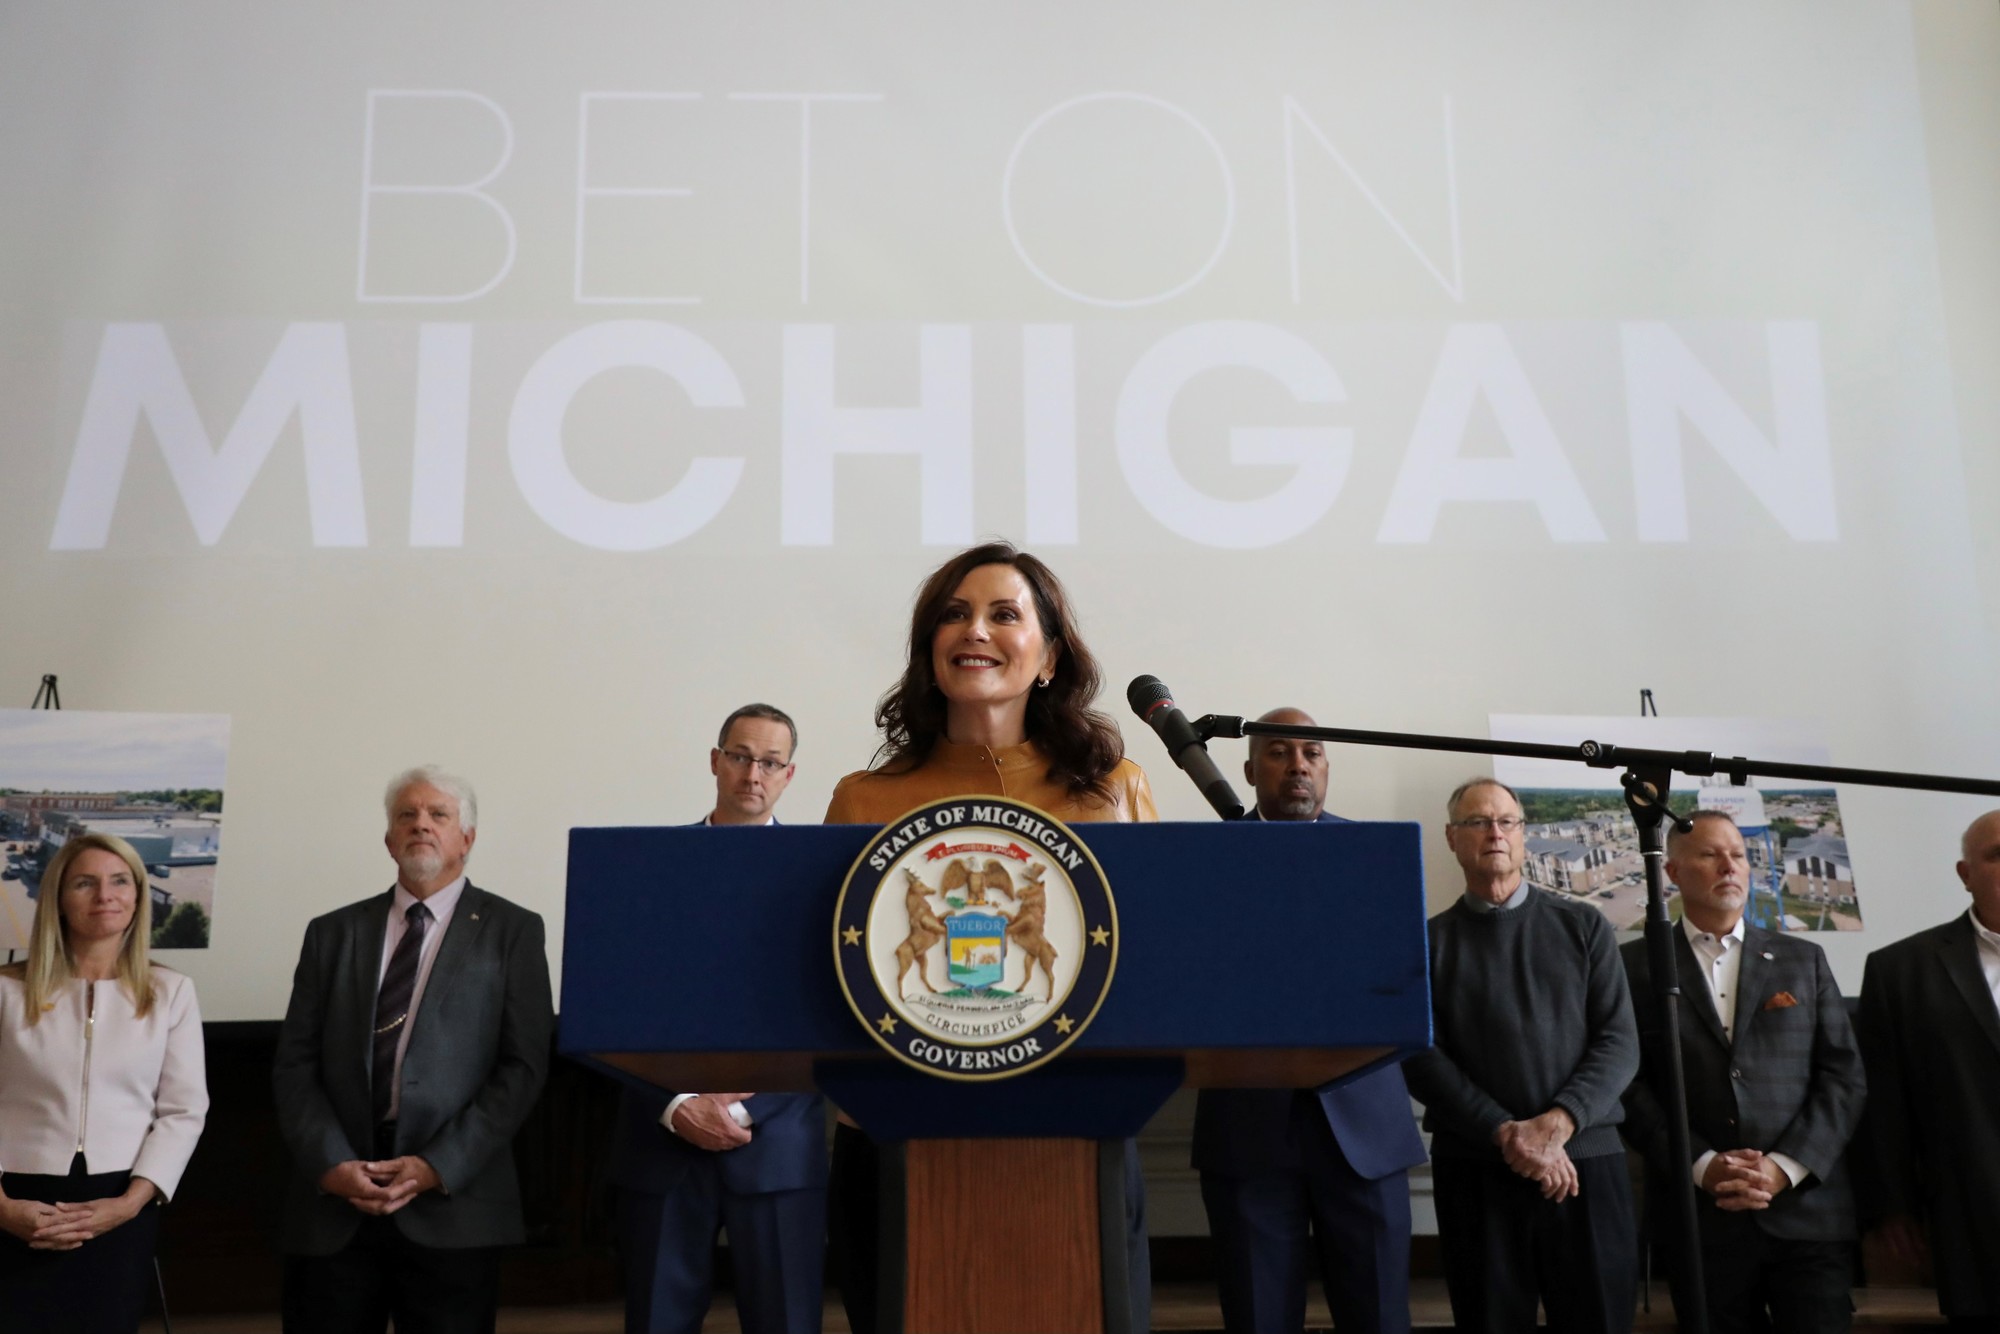 Gov. Whitmer stands at podium at event. Behind her, a screen with the text 'Bet on Michigan' is displayed 